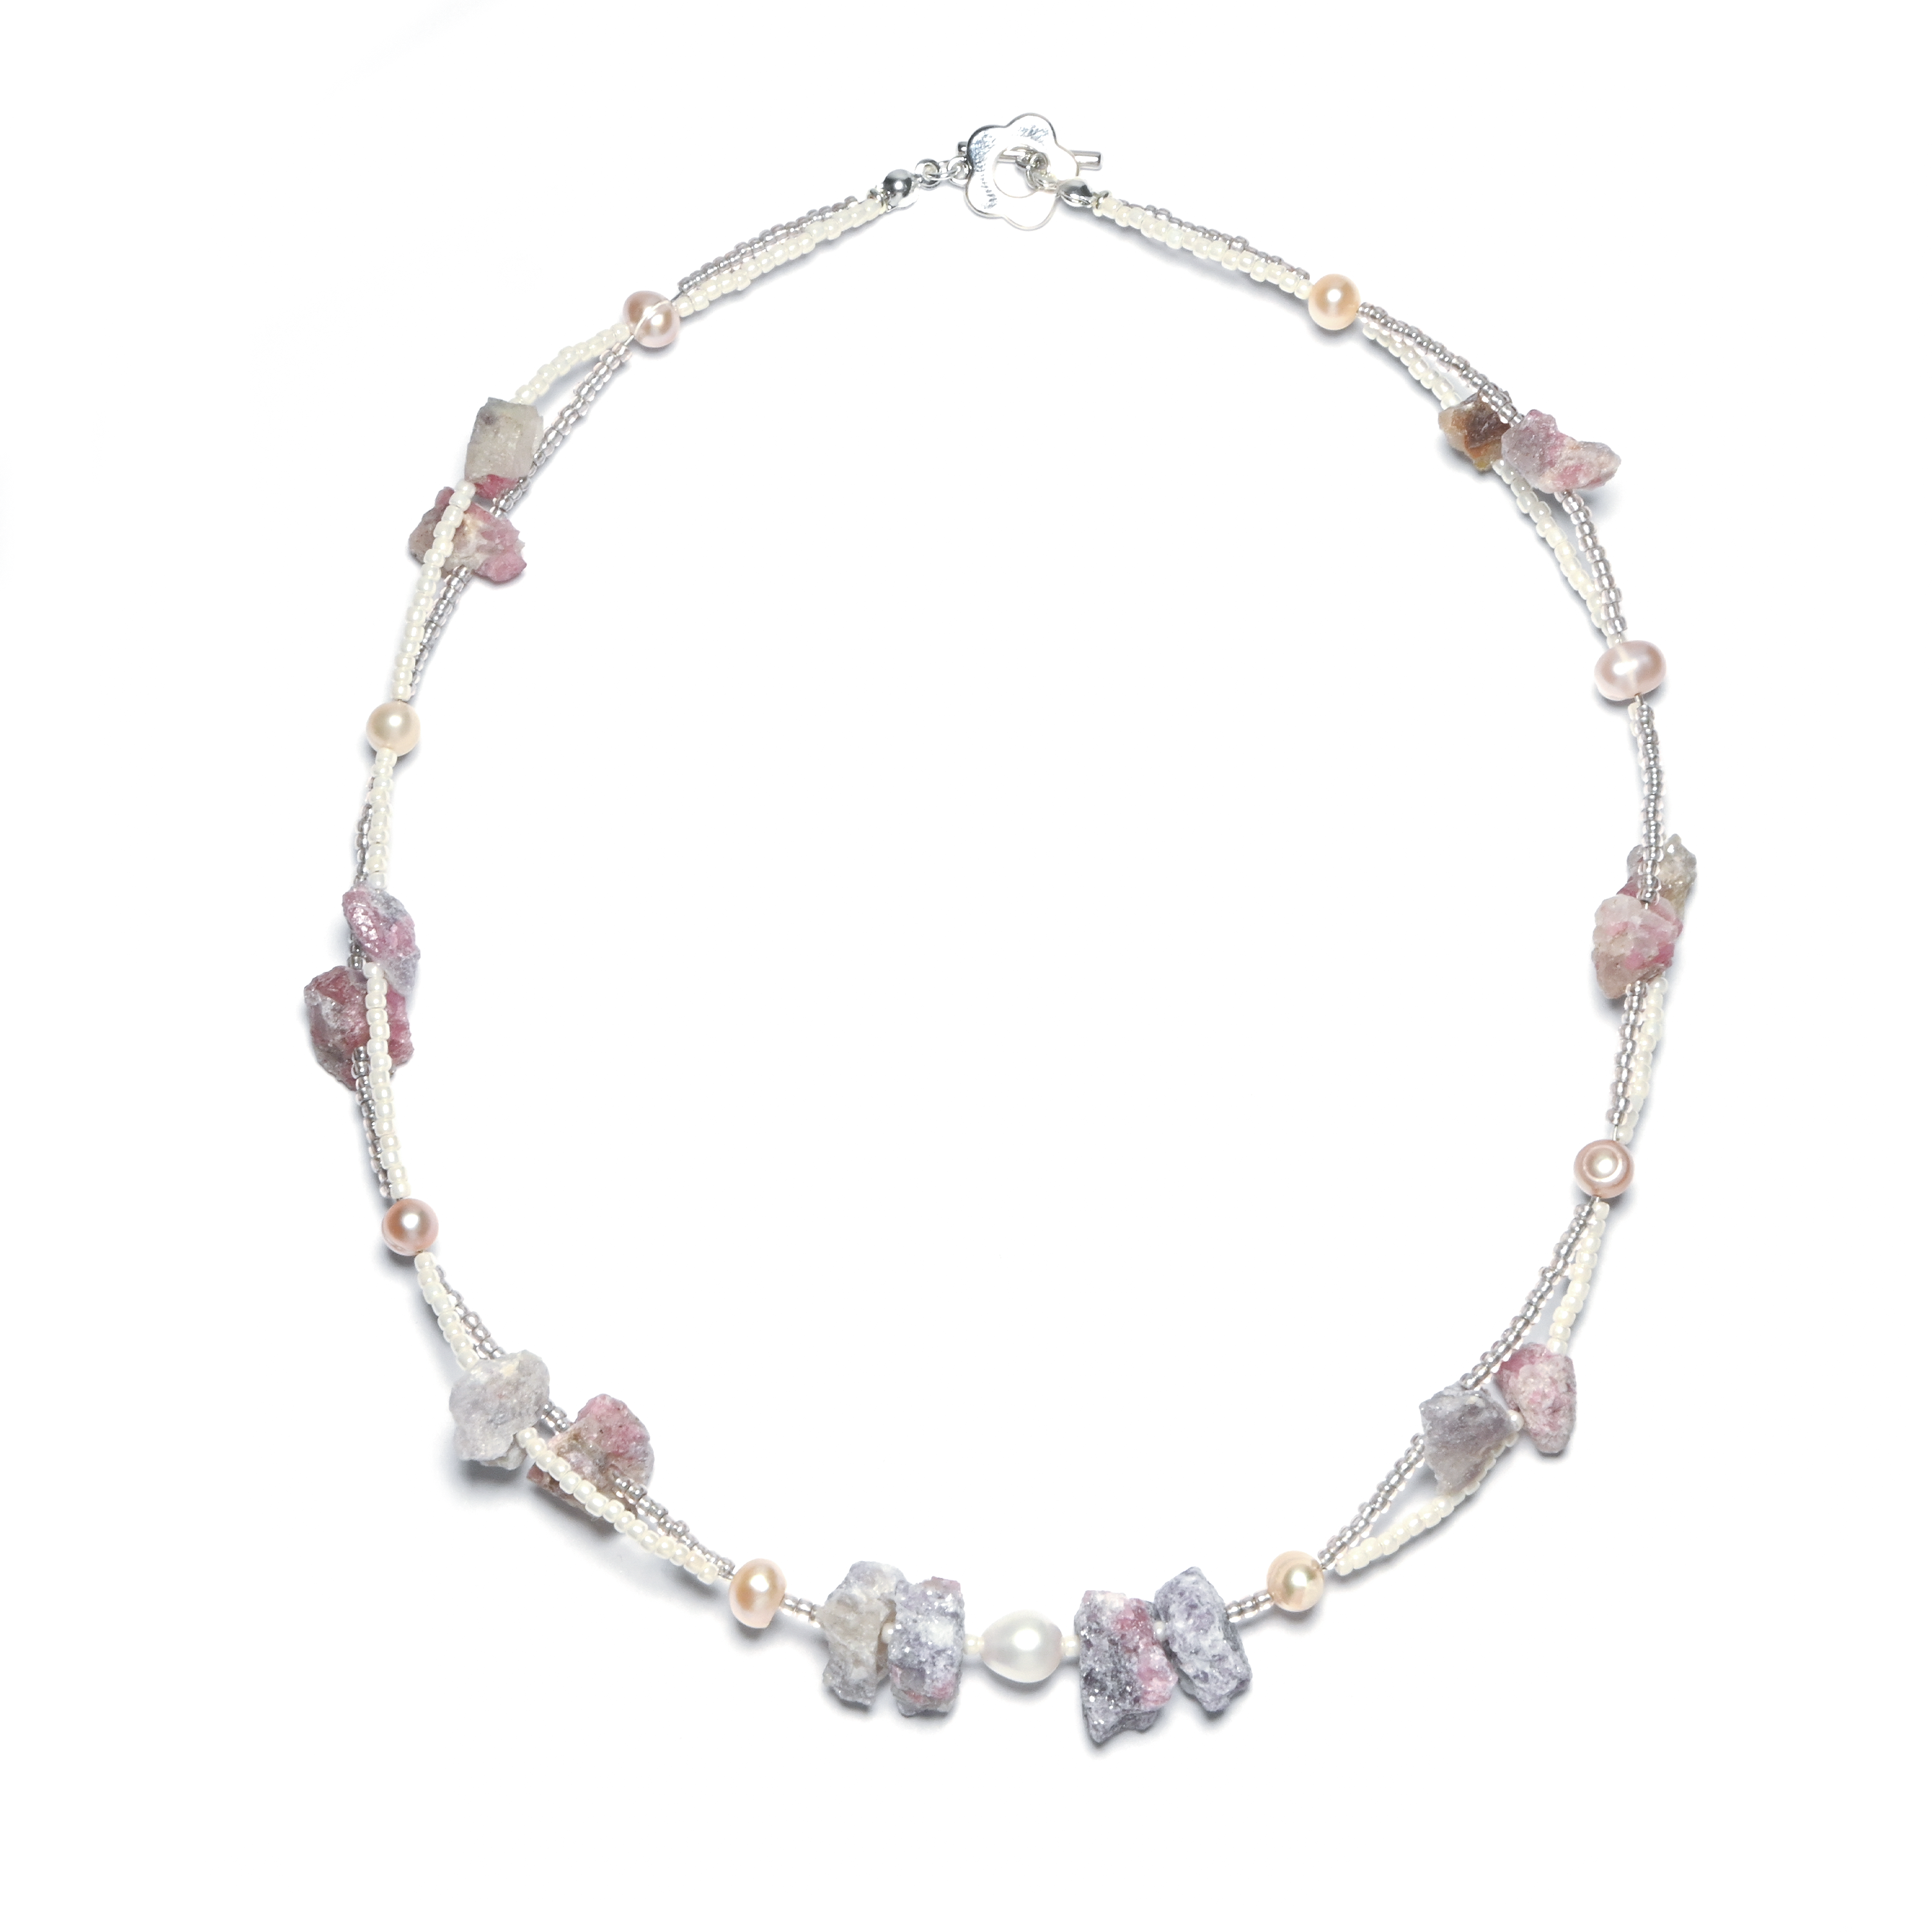 Avalanche Rose Beaded Crystal with Freshwater Pearls Healing Crystal and Rough Stone Handmade Double-Necklace, textured Jewelry Gift for your Girl.